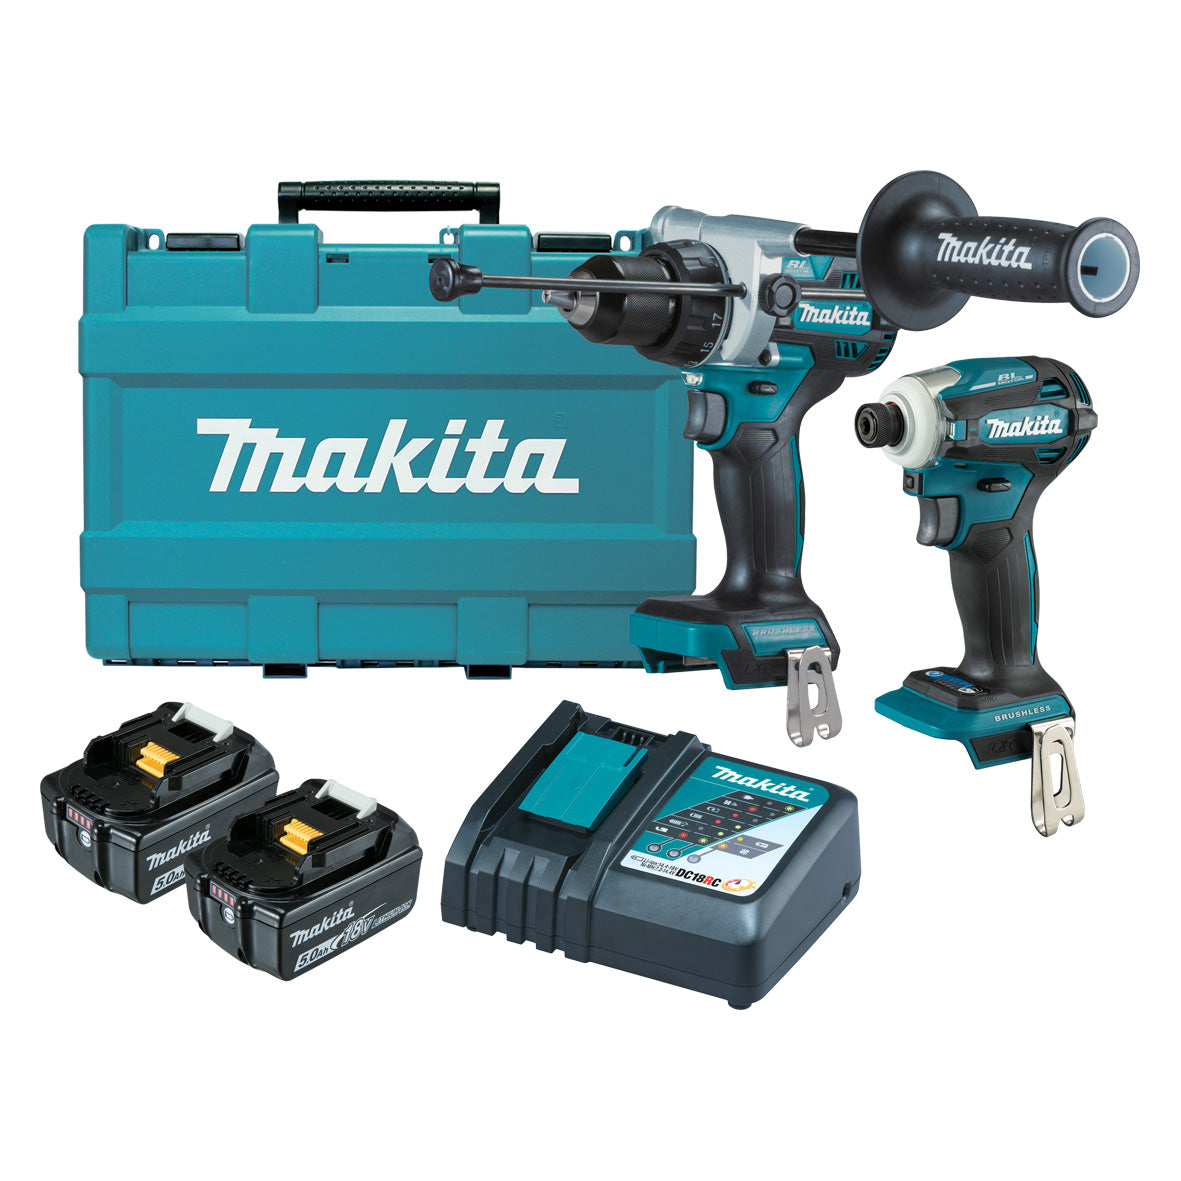 18V 5.0Ah 2Pce Brushless Hammer Driver Drill + Impact Driver DLX2455T by Makita